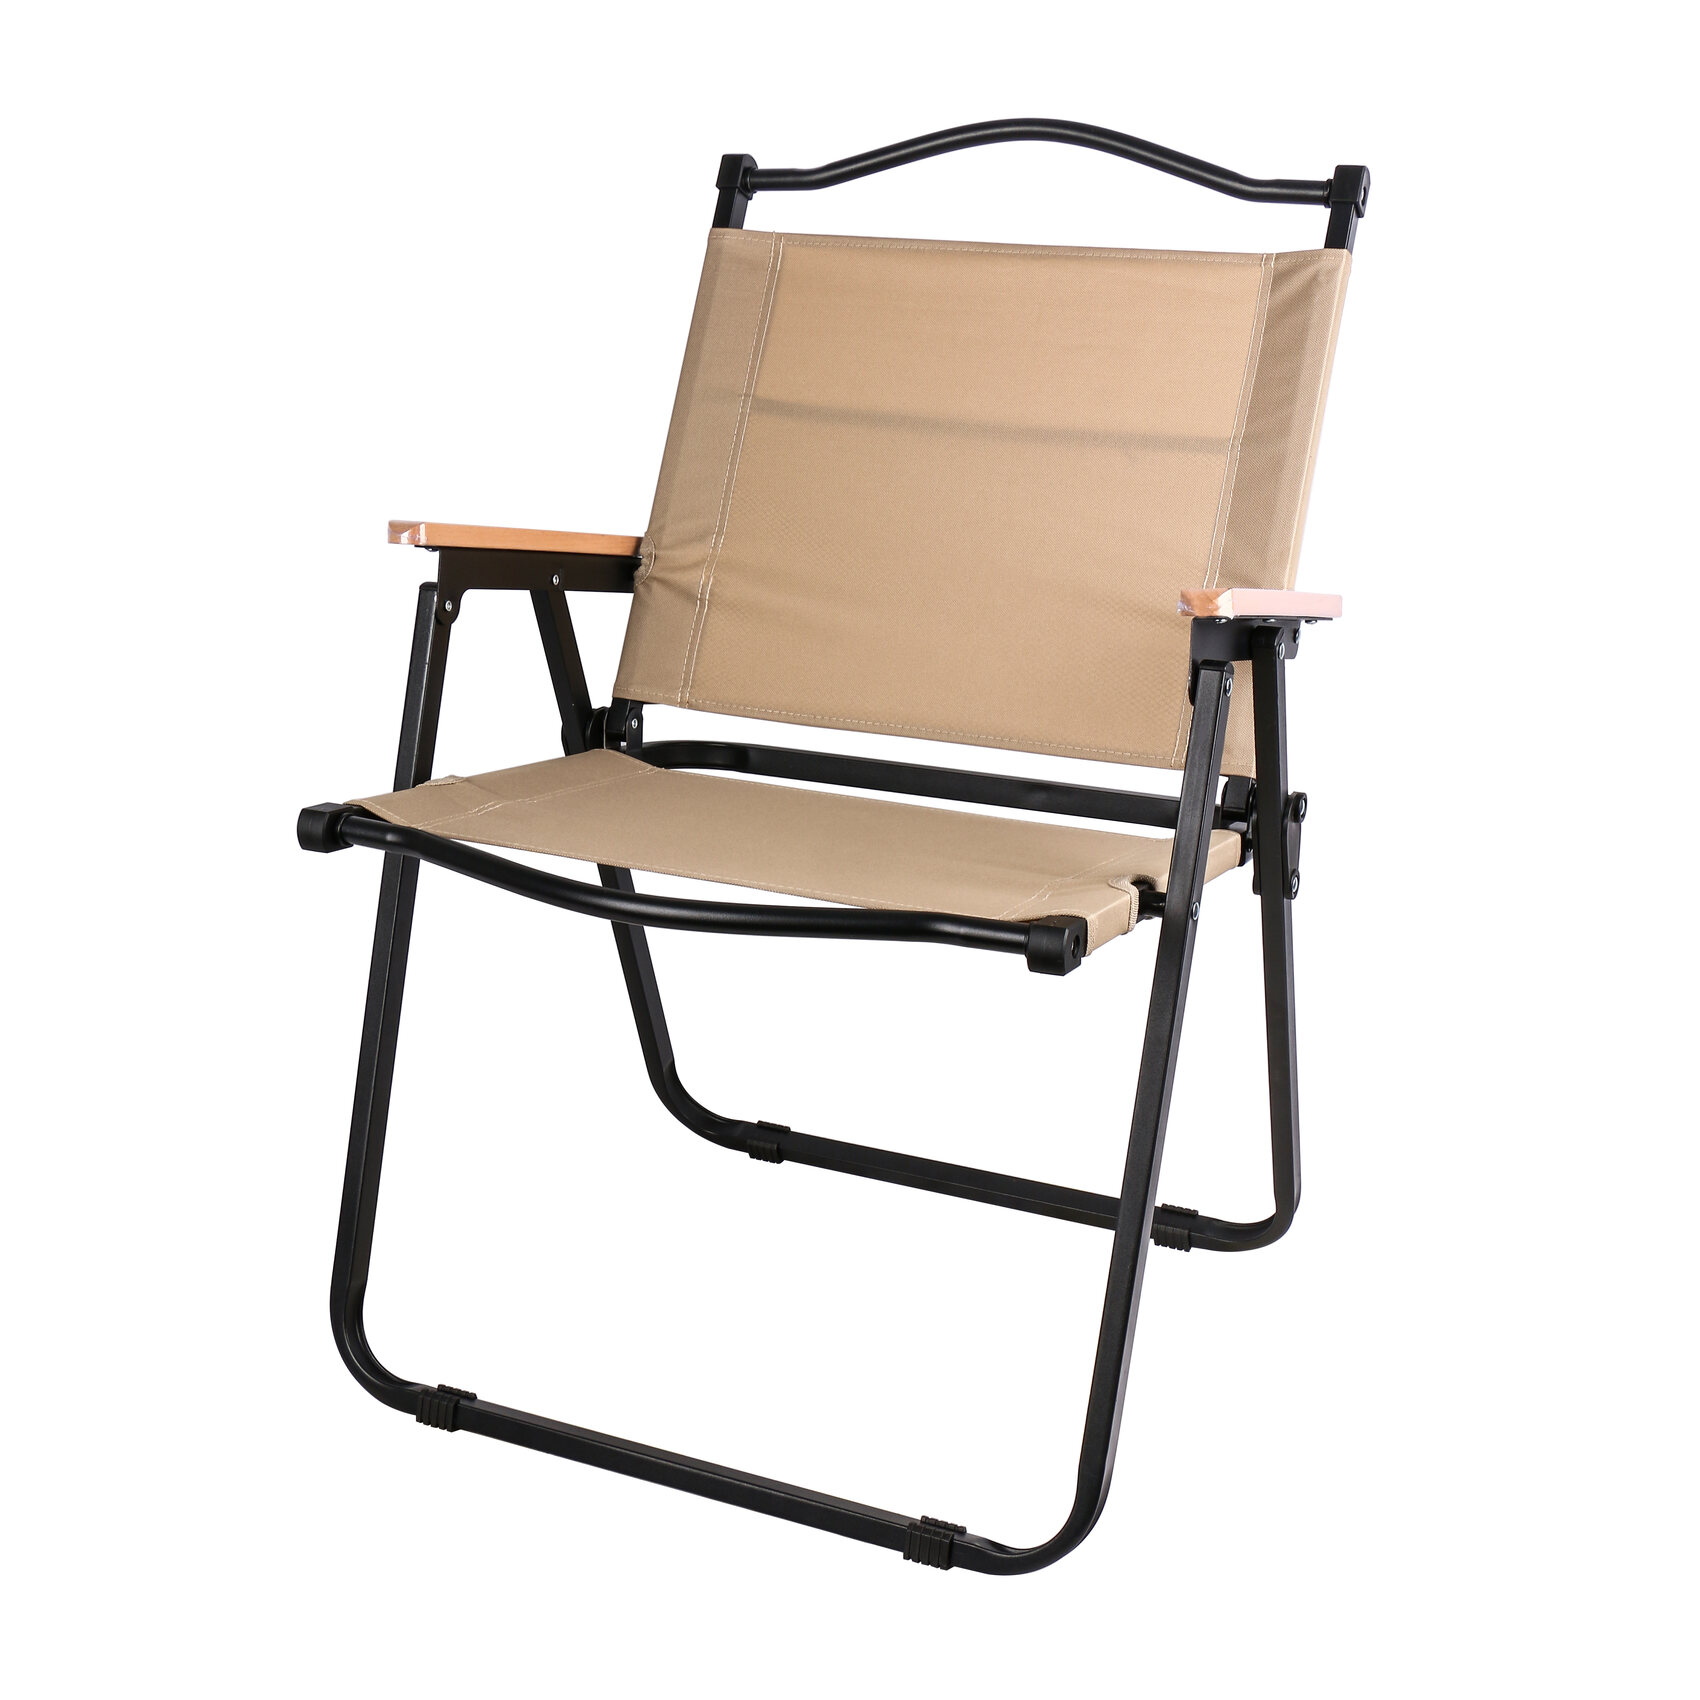 CAMPMATE FOLDABLE CAMPING CHAIR CM-7876 WITH WOODEN ARM REST |FOR CAMPING - FISHING -OUTDOOR- PICNIC